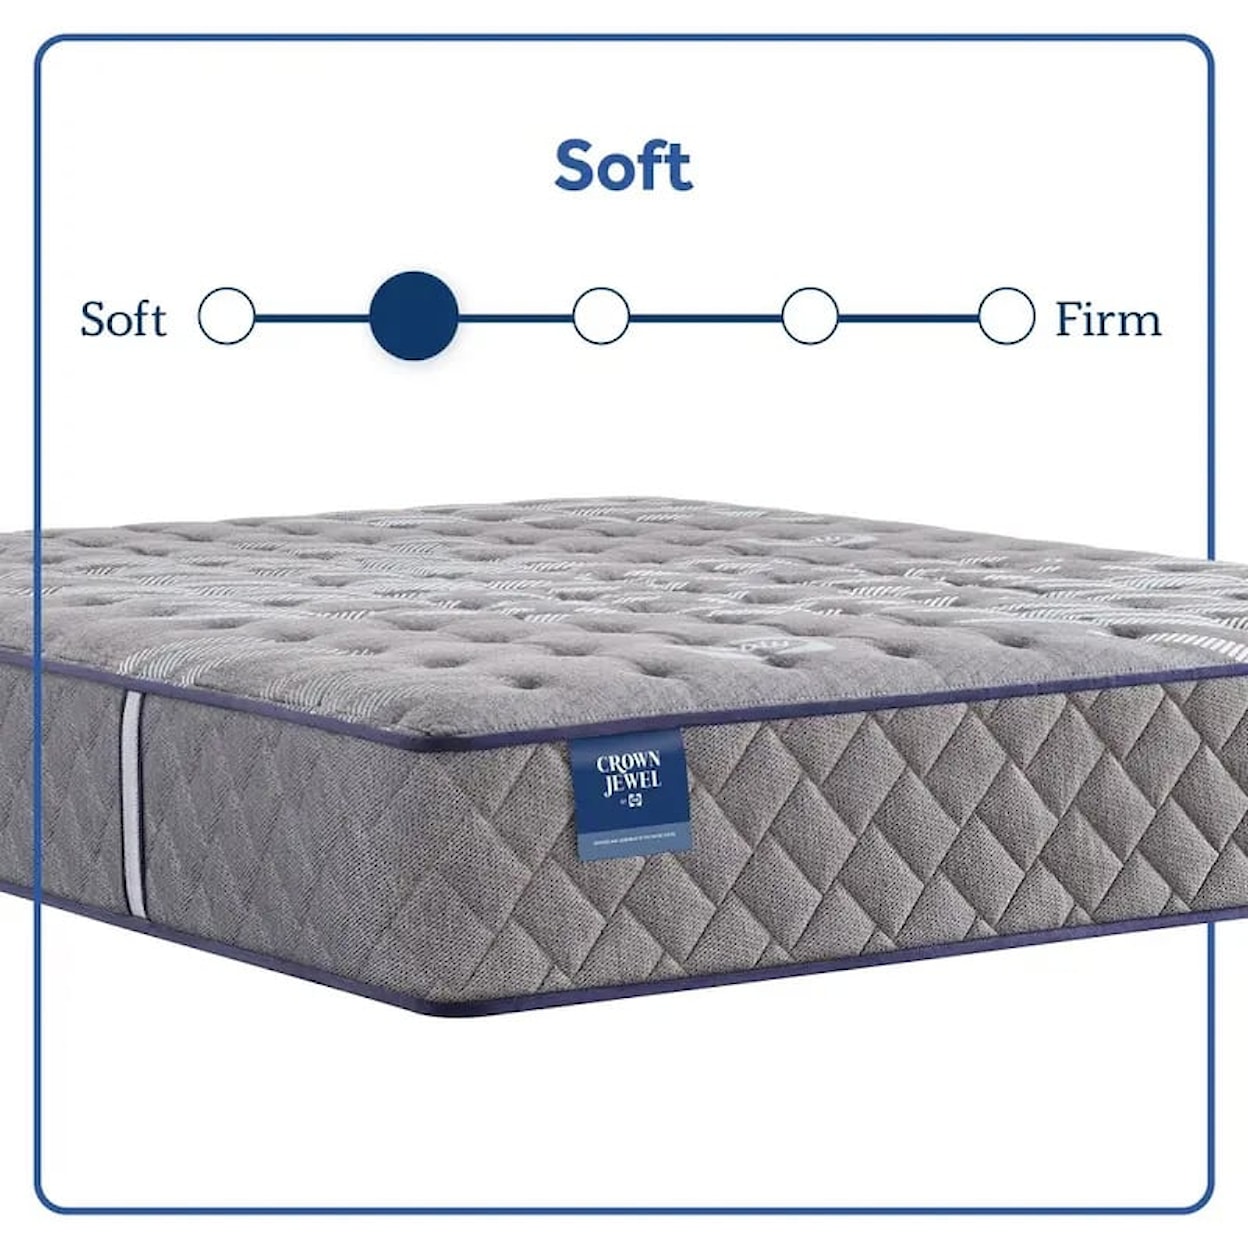 Sealy Sealy Crown Jewel Royal Cove Soft Double Mattress